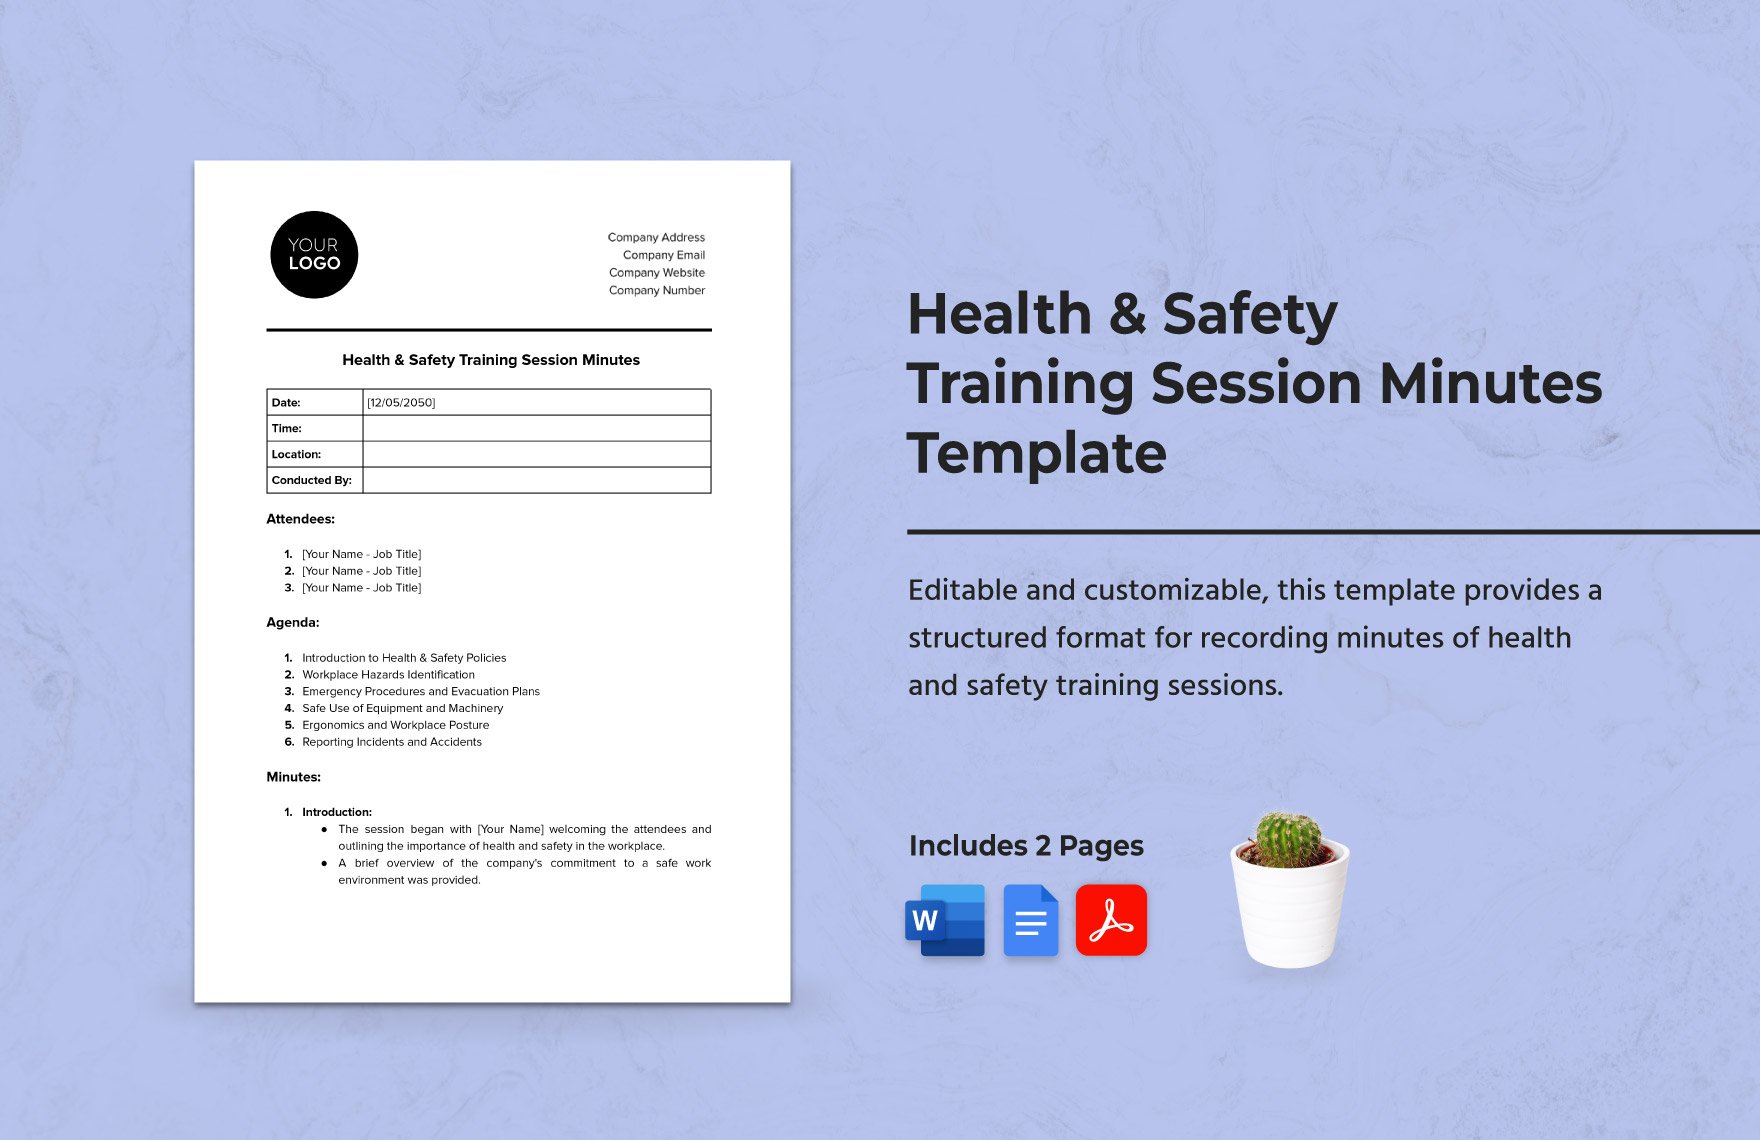 Health & Safety Training Session Minutes Template